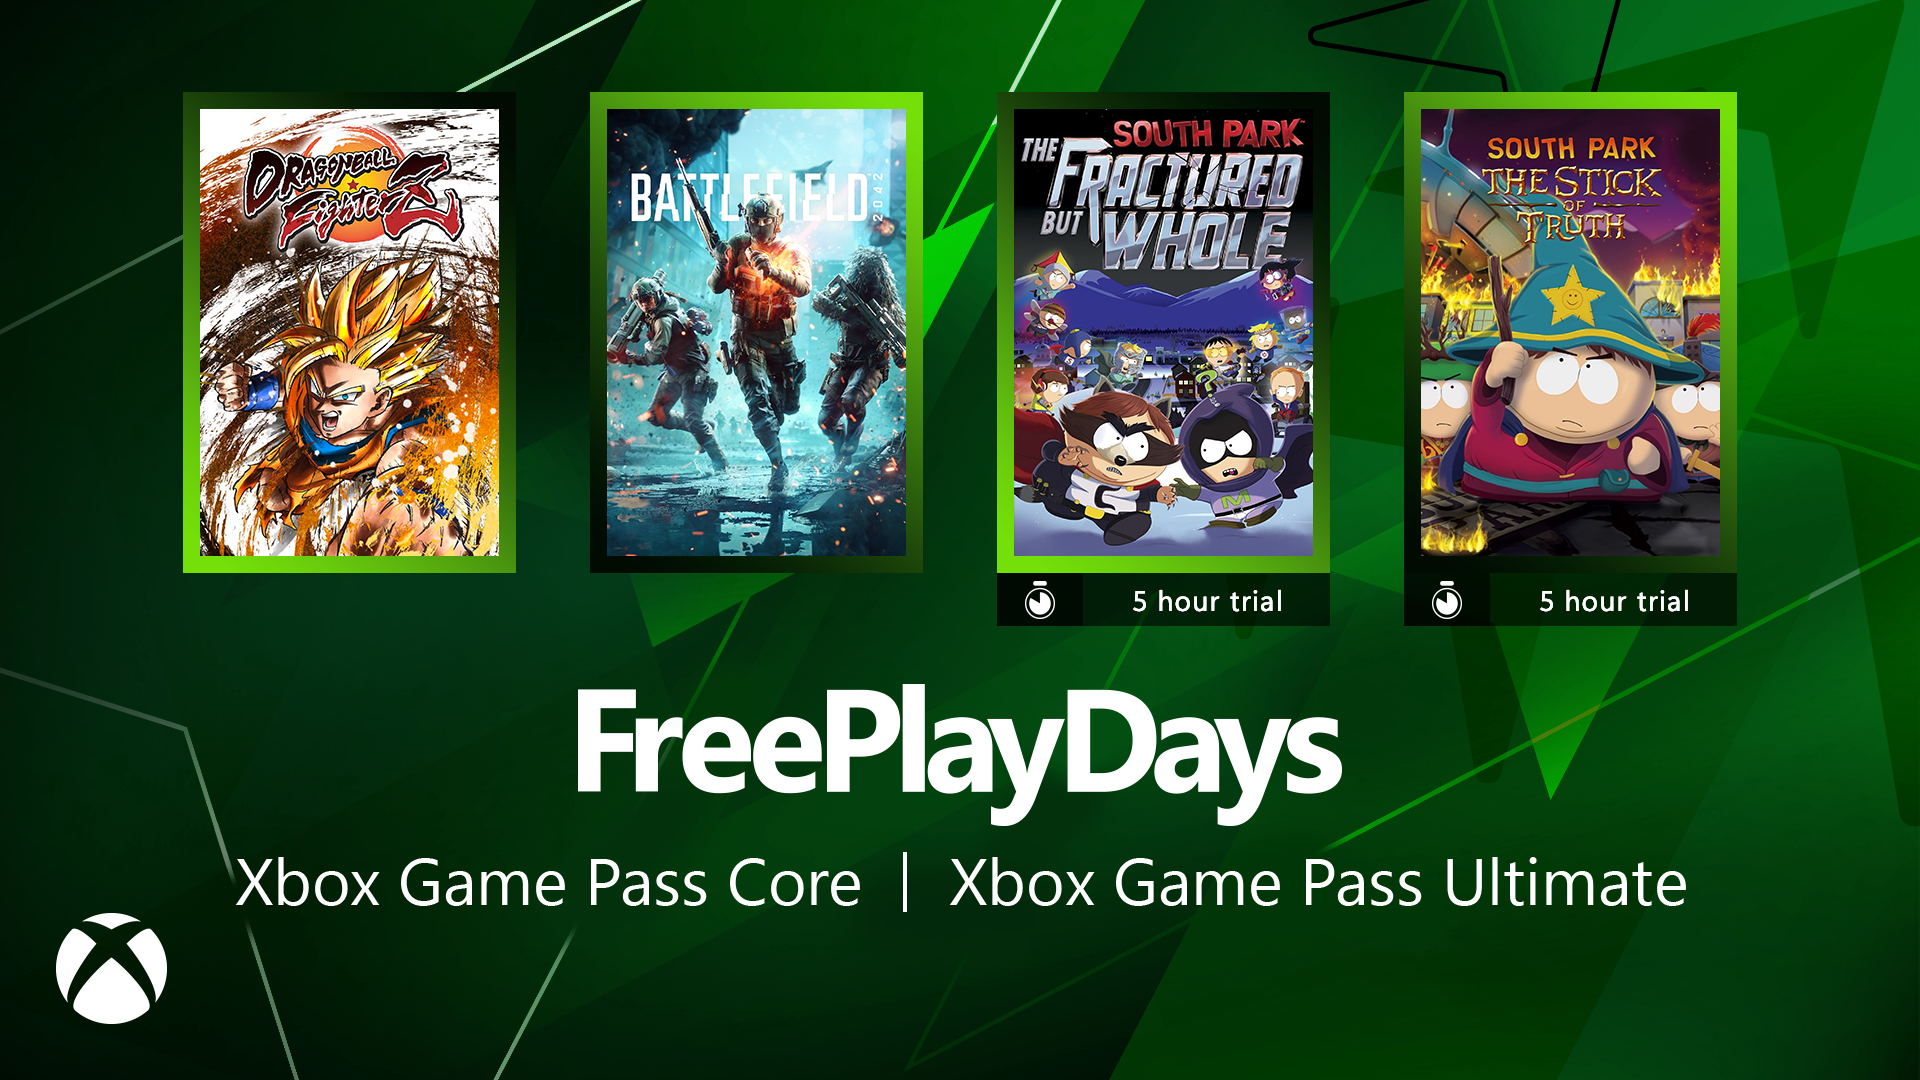 Free Play Days – Dragon Ball FighterZ, Battlefield 2042, South Park: The Fractured but Whole and South Park: The Stick of Truth